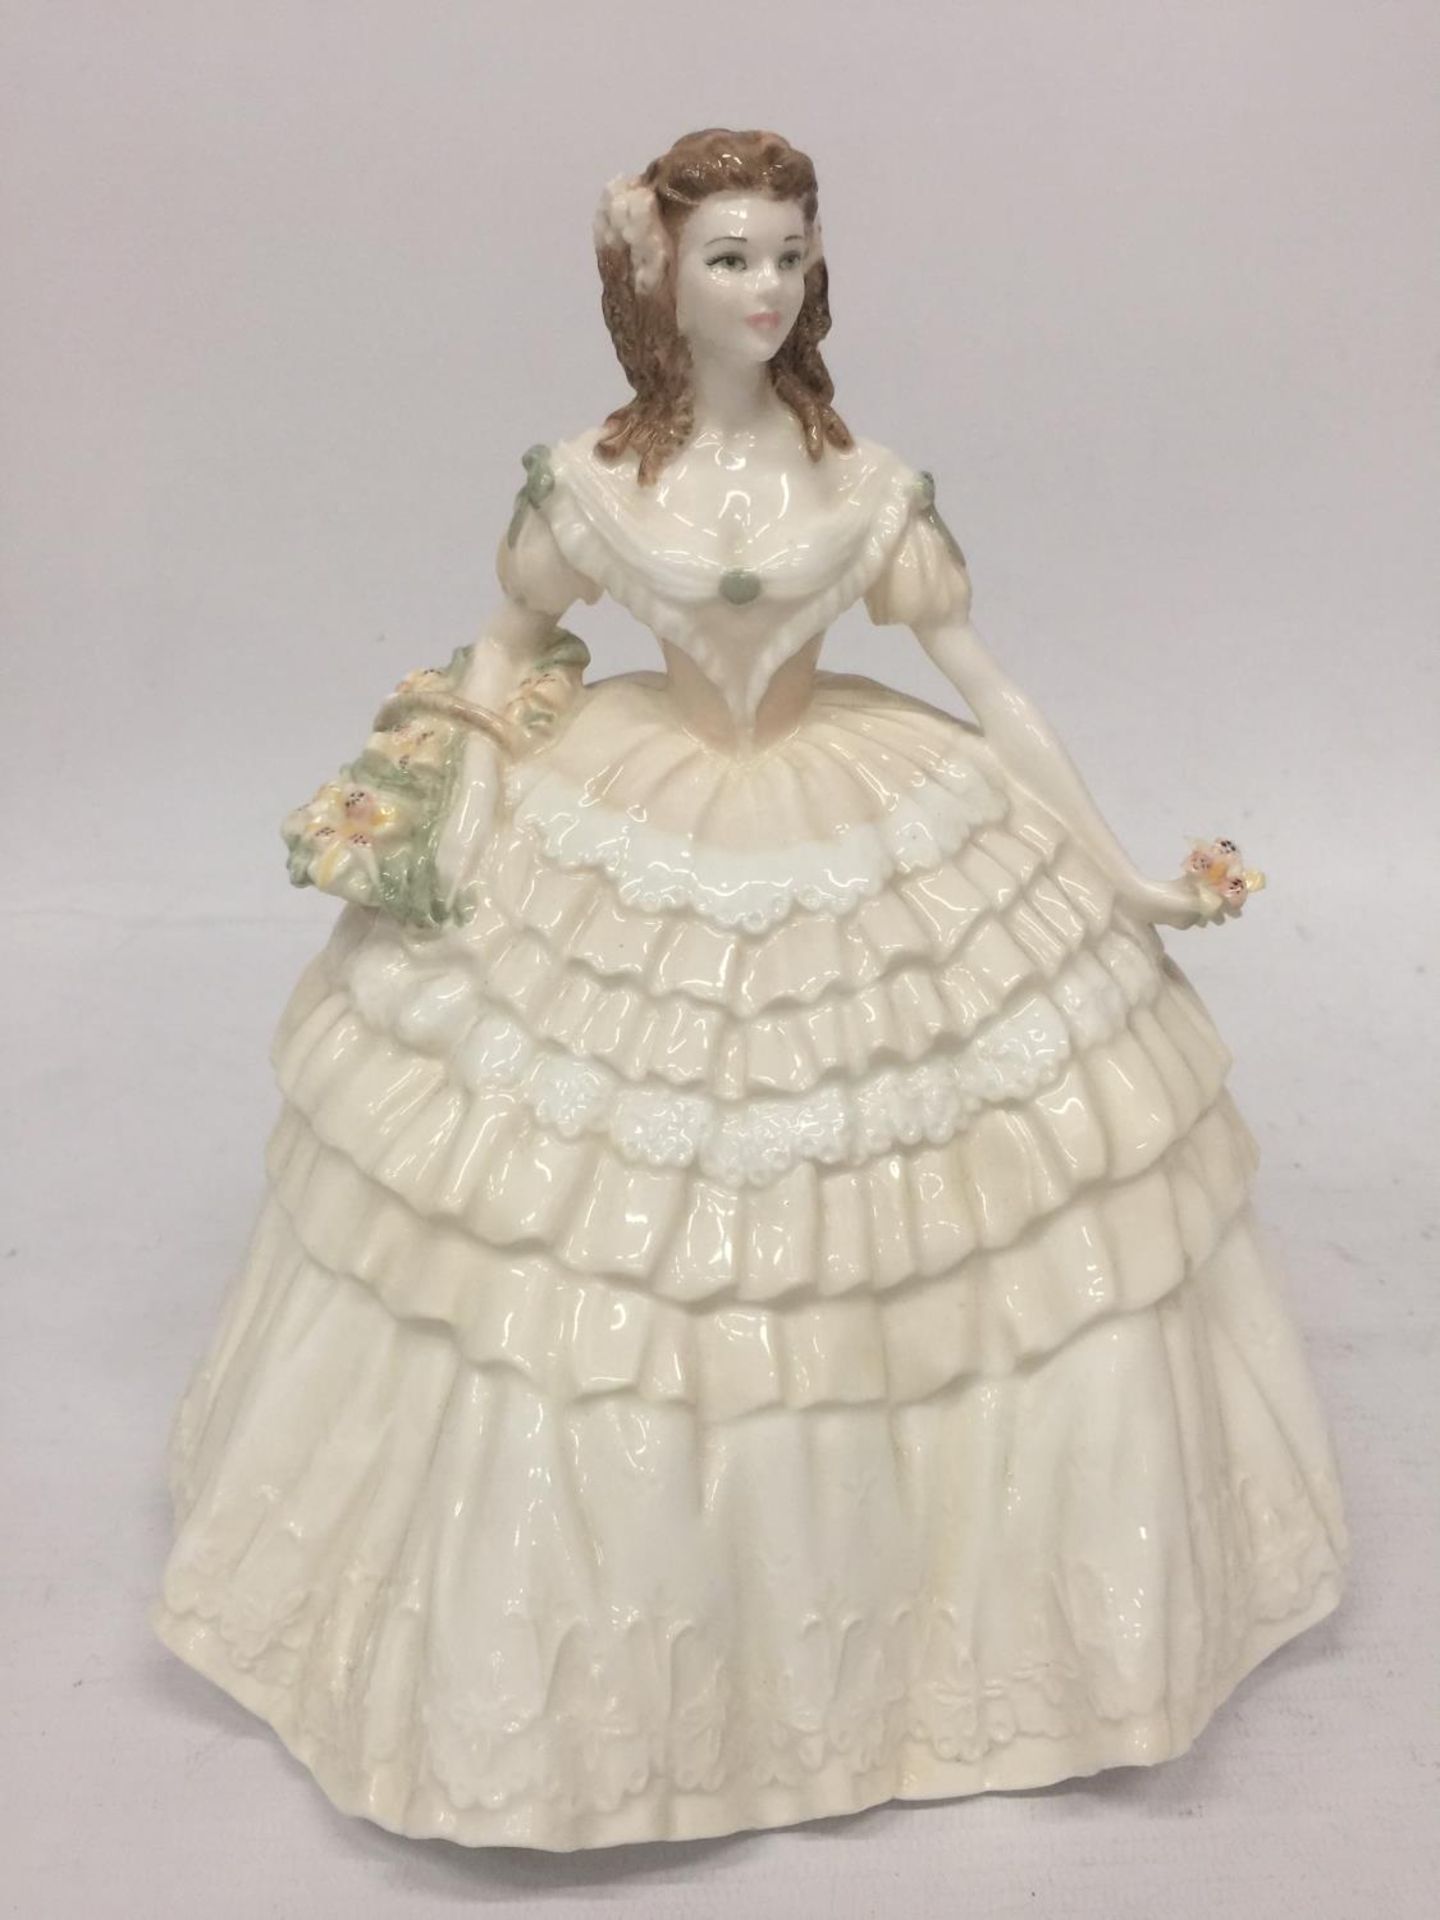 A STUNNING COALPORT FIGURINE FROM "THE FOUR FLOWERS COLLECTION" SCULPTED BY JACK GLYUNN AND BEING